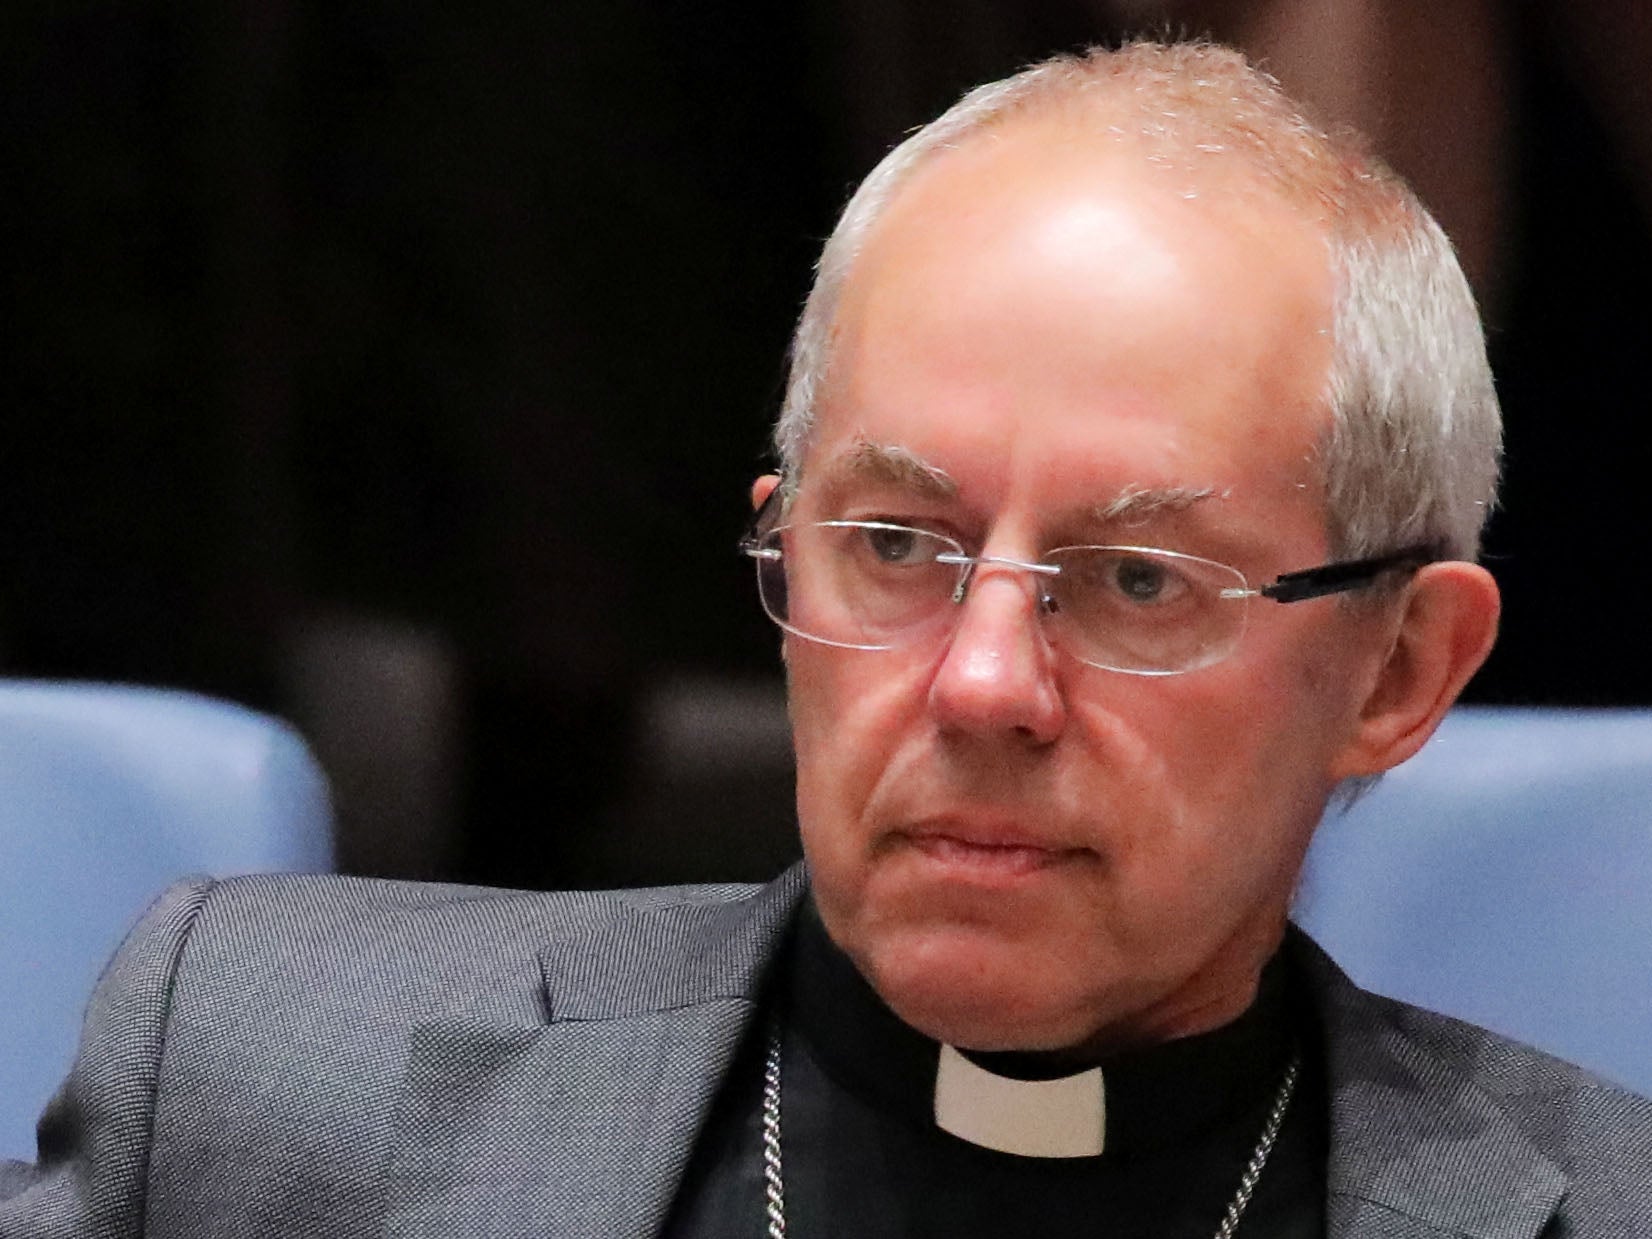 The Most Rev Justin Welby was giving evidence to the Independent Inquiry into Child Sexual Abuse.